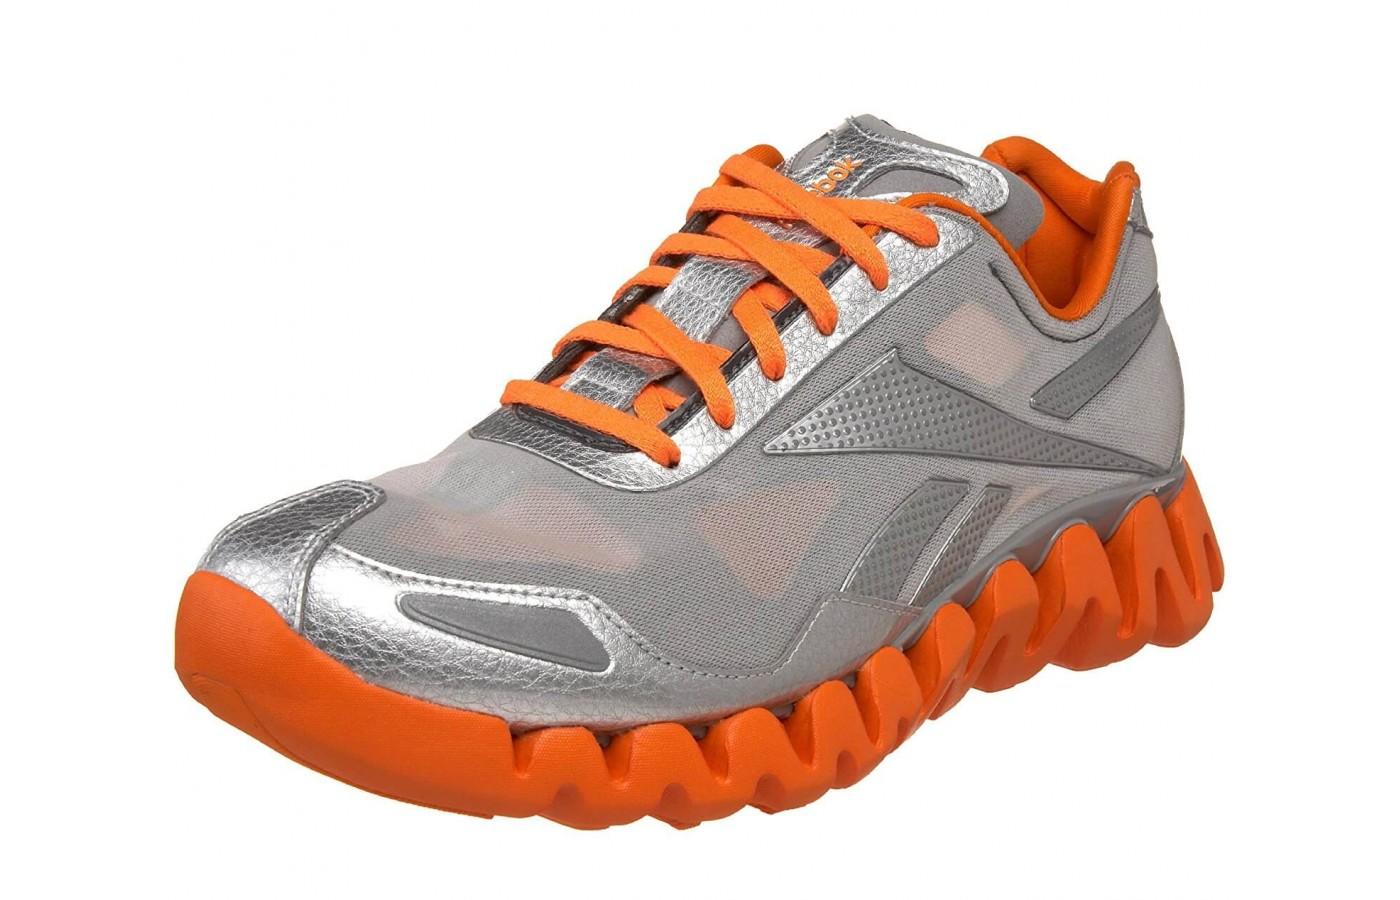 the Reebok Zig Pulse is an eye-catching running shoe with its dynamic ZigTech outsole